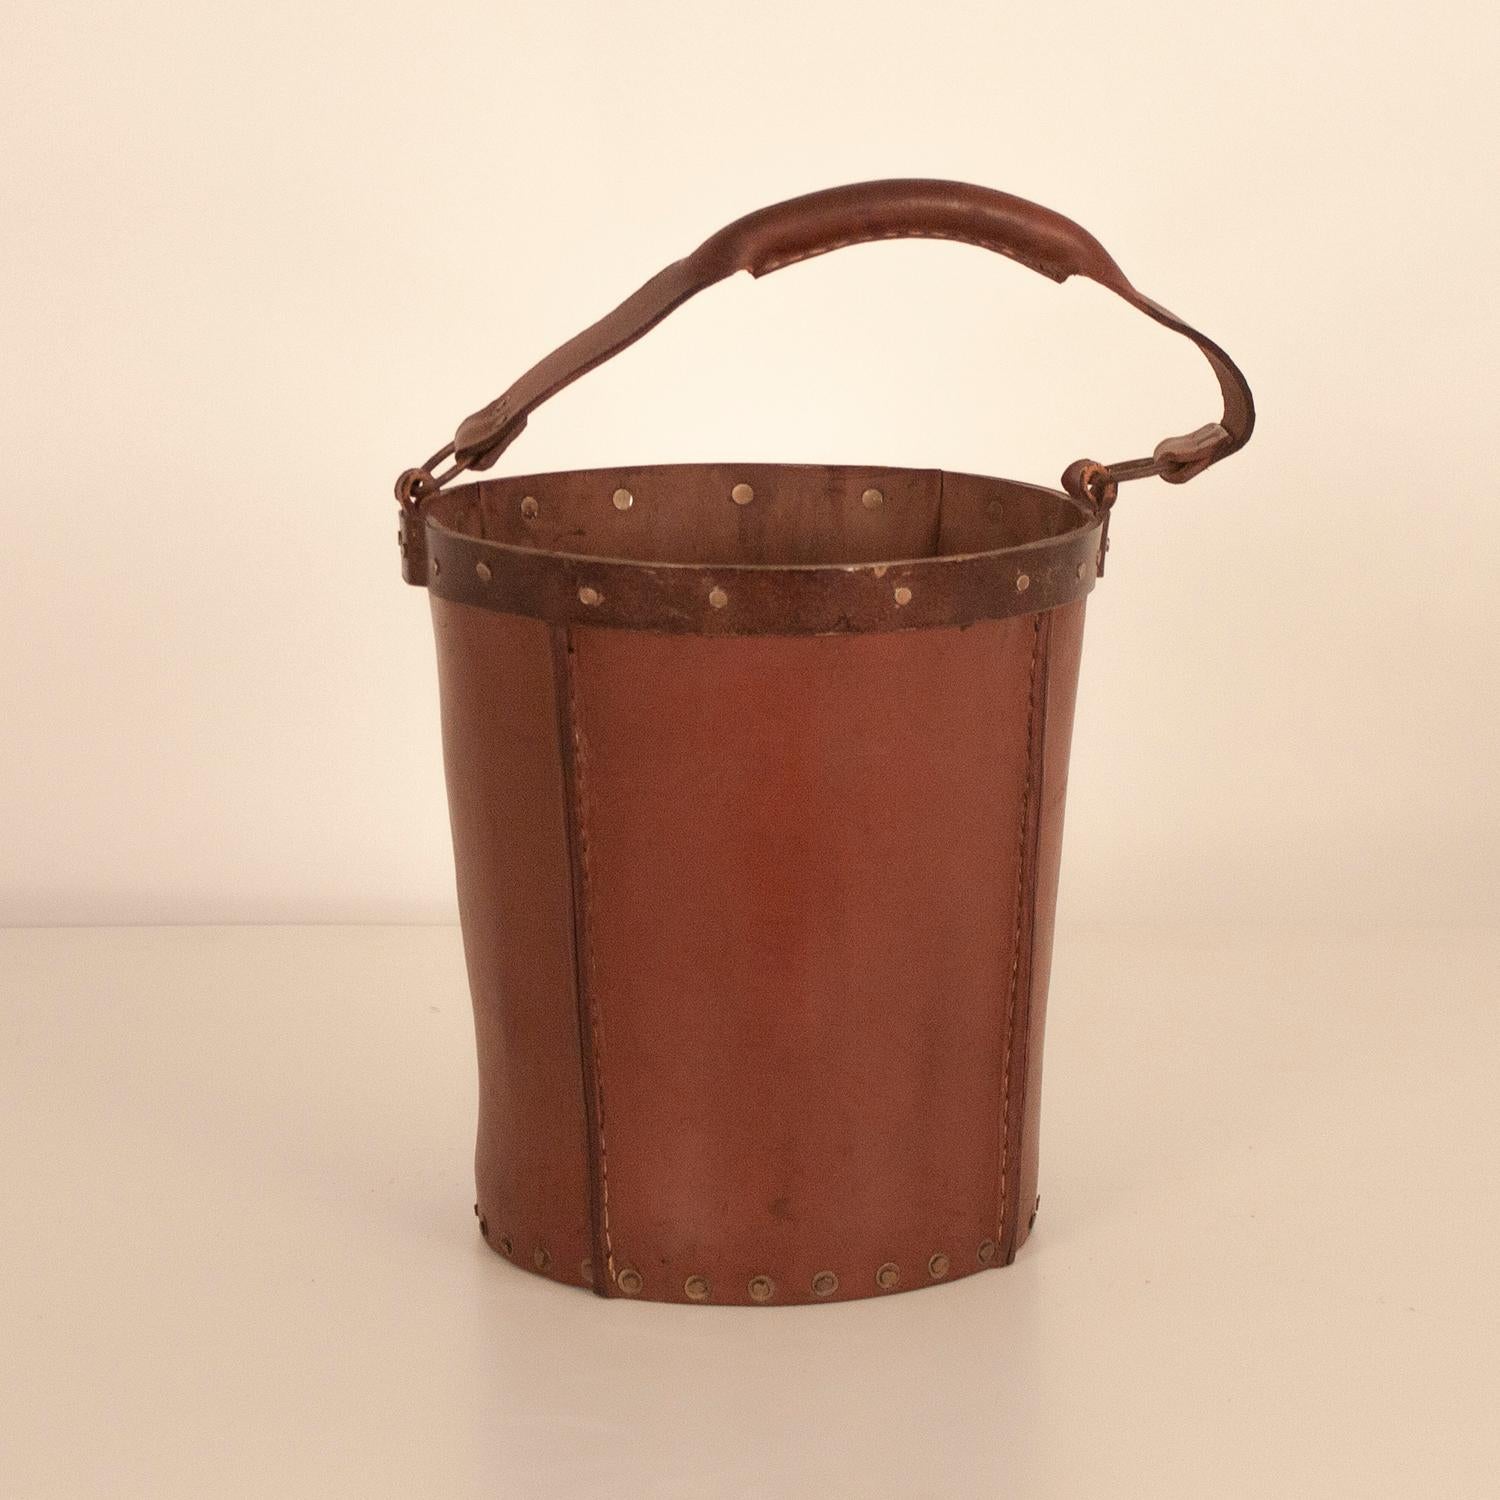 Vintage brown leather waste basket
Made from brown leather with golden metal embellishments.
Produced by Valenti, Spain, circa 1970.